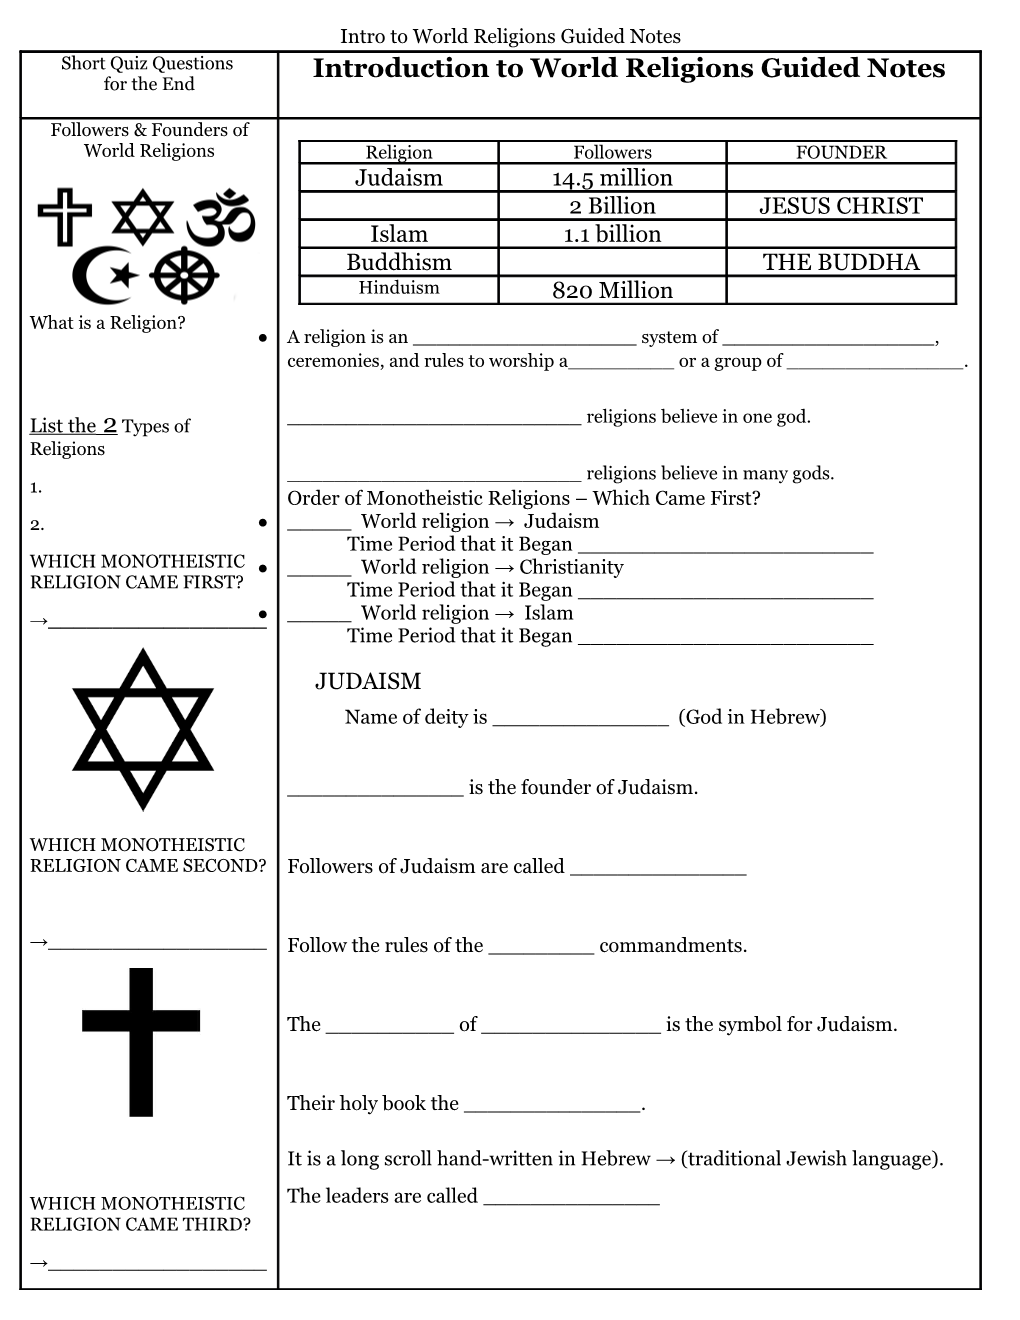 Intro to World Religions Guided Notes